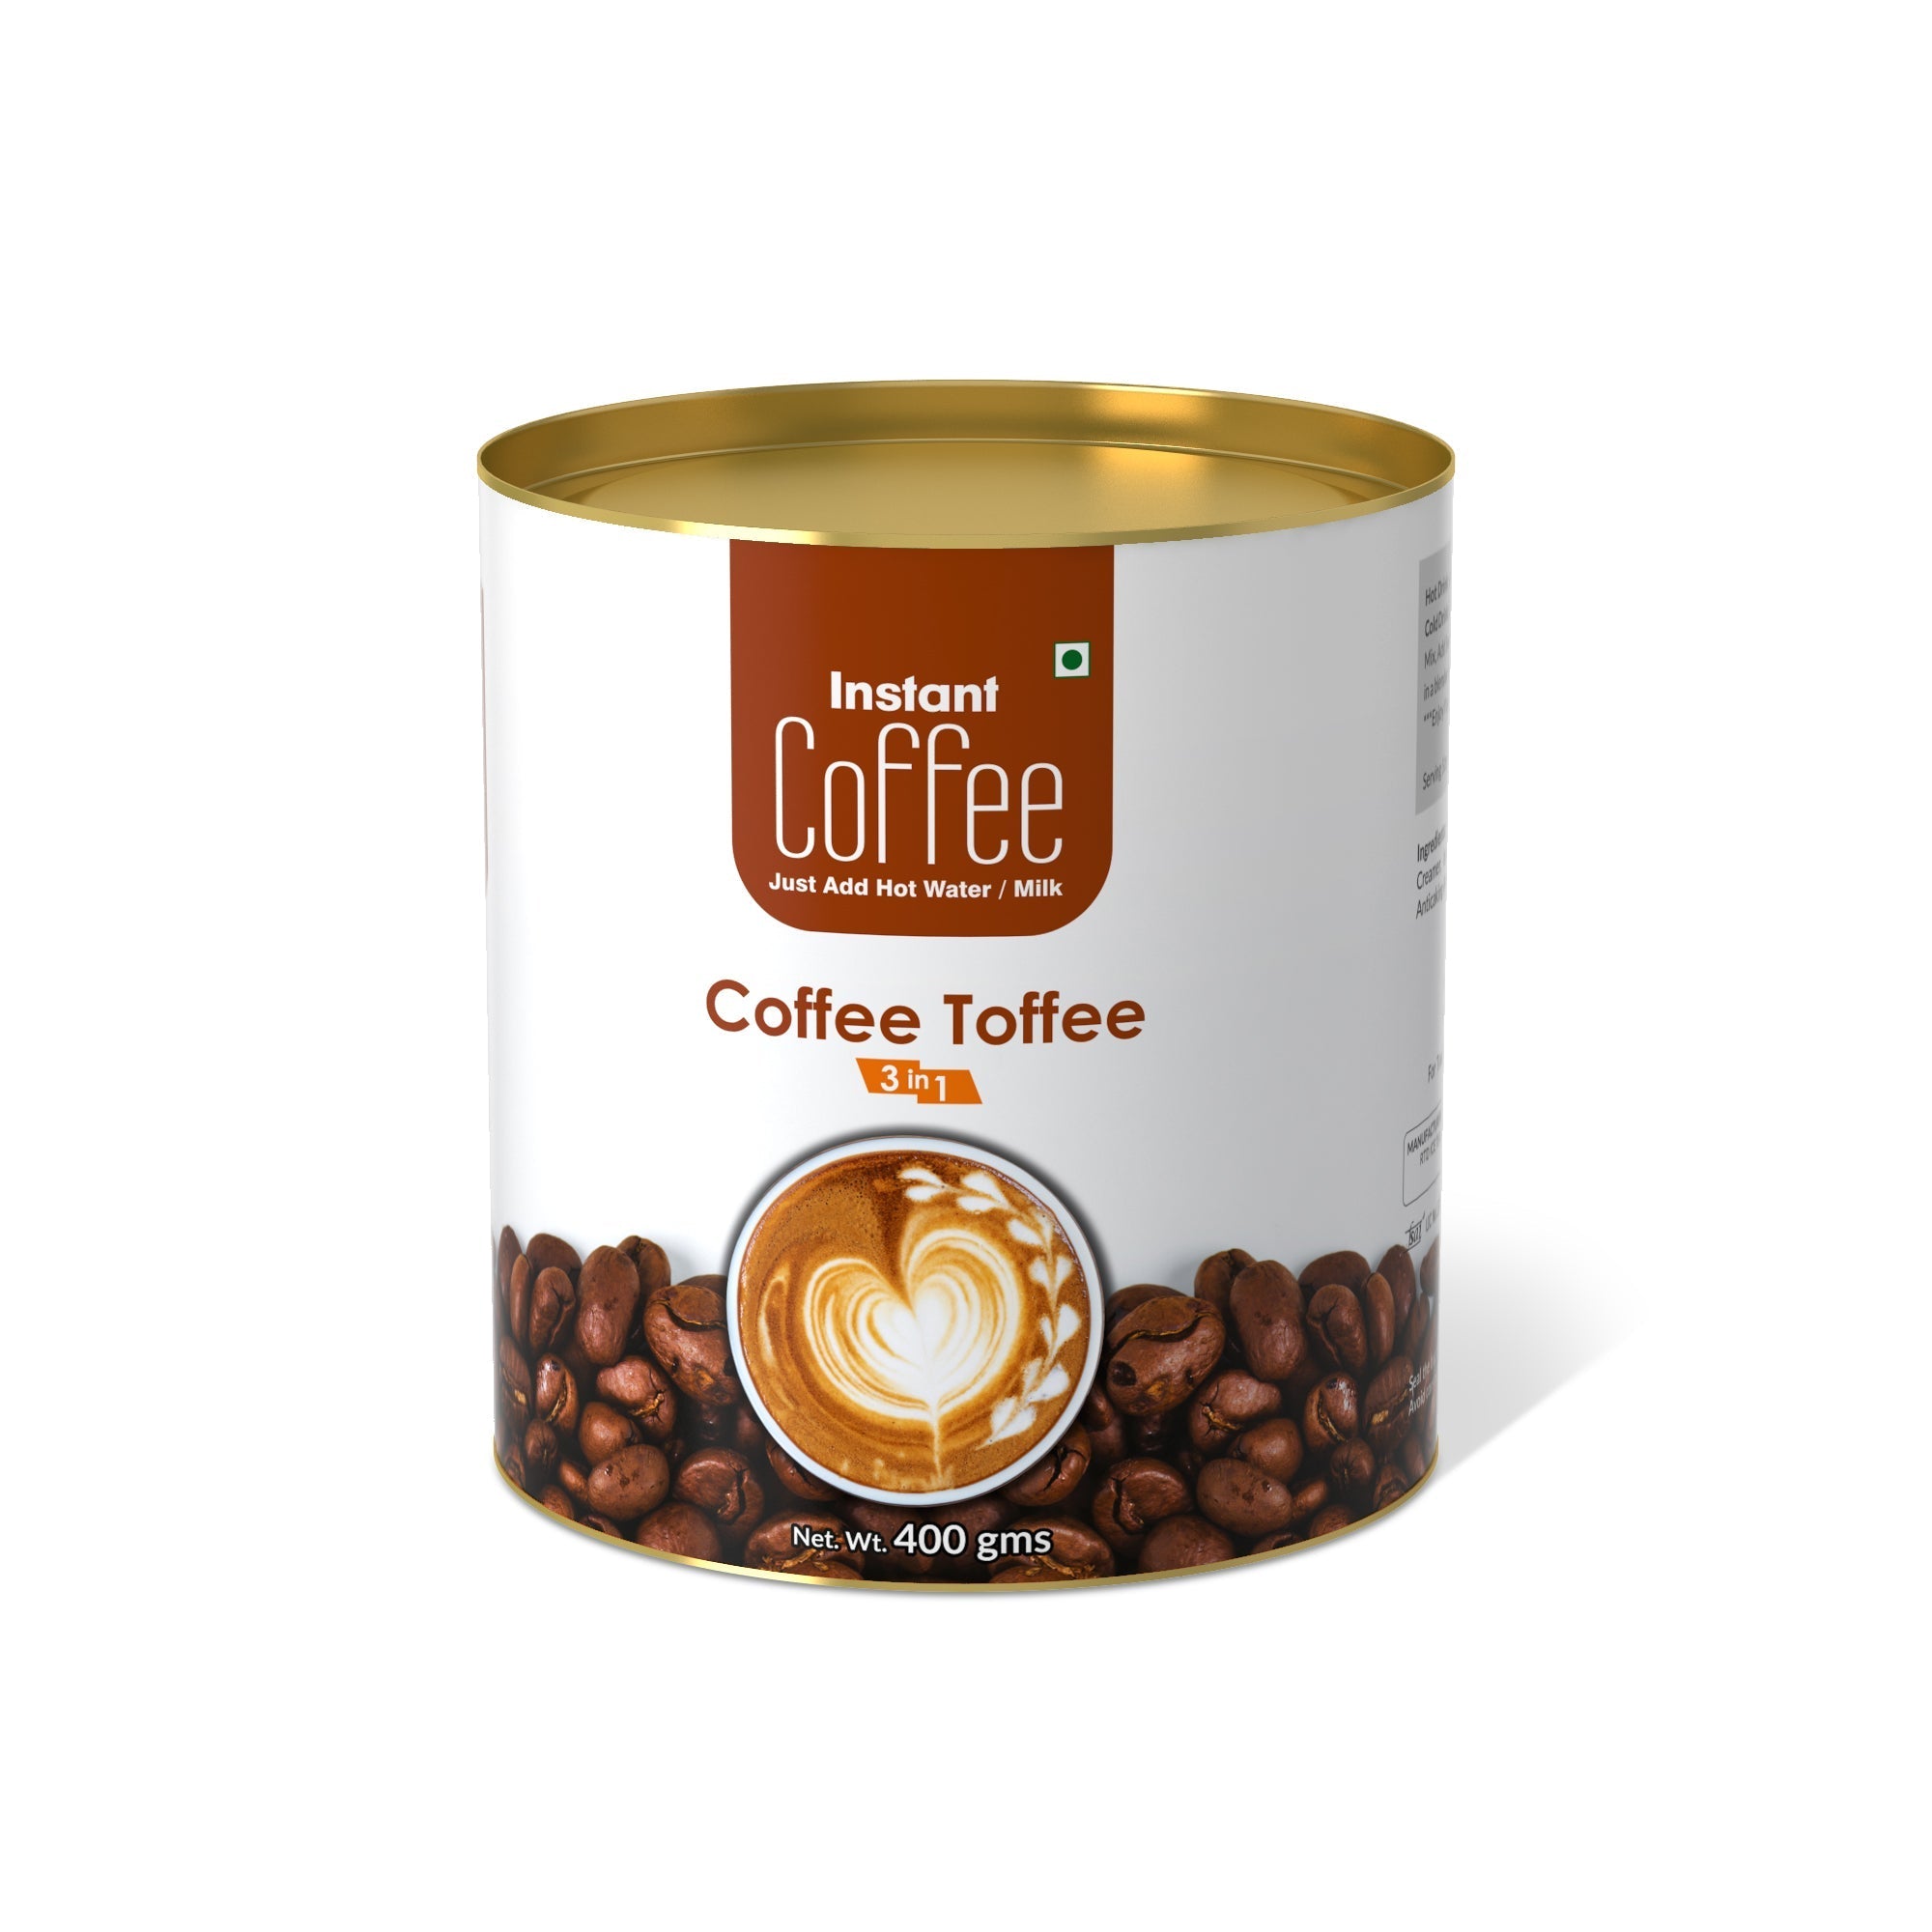 Coffee Toffee Instant Coffee Premix (3 in 1) - 400 gms